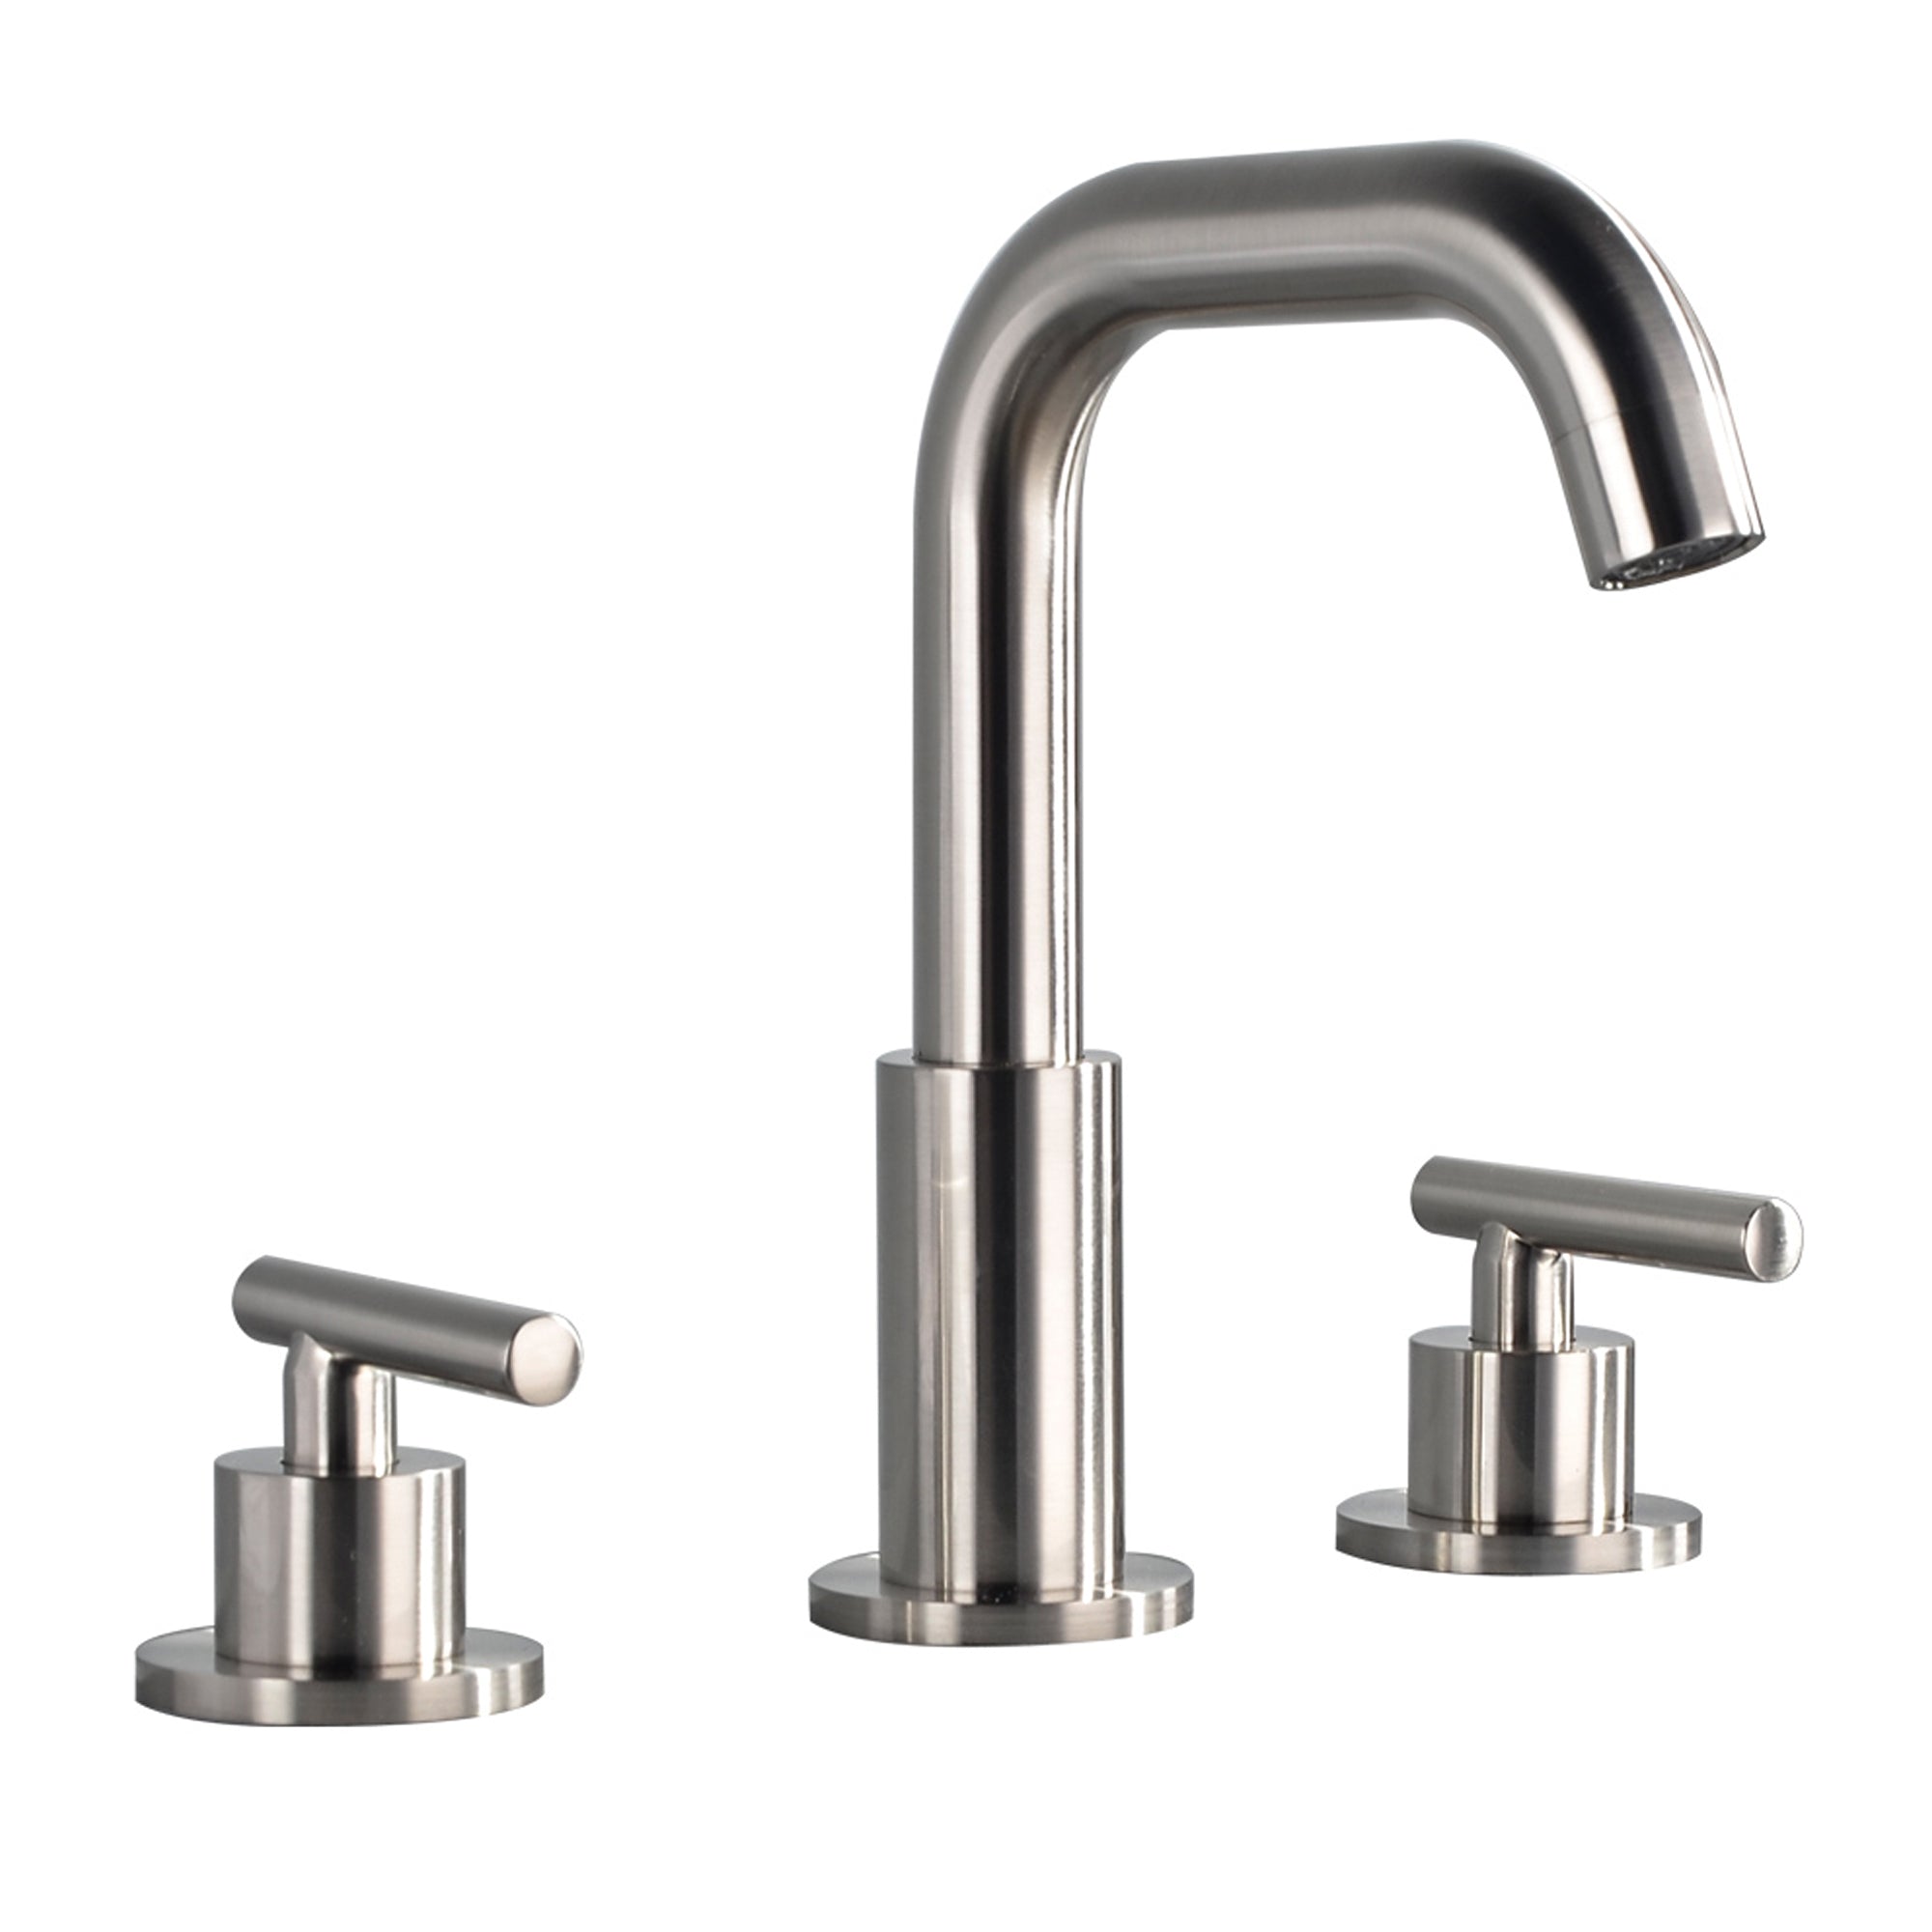 Boyel Living 8 in. Widespread 2-Handle Mid-Arc Bathroom Faucet with Valve and cUPC Water Supply Lines in Brushed Nickel